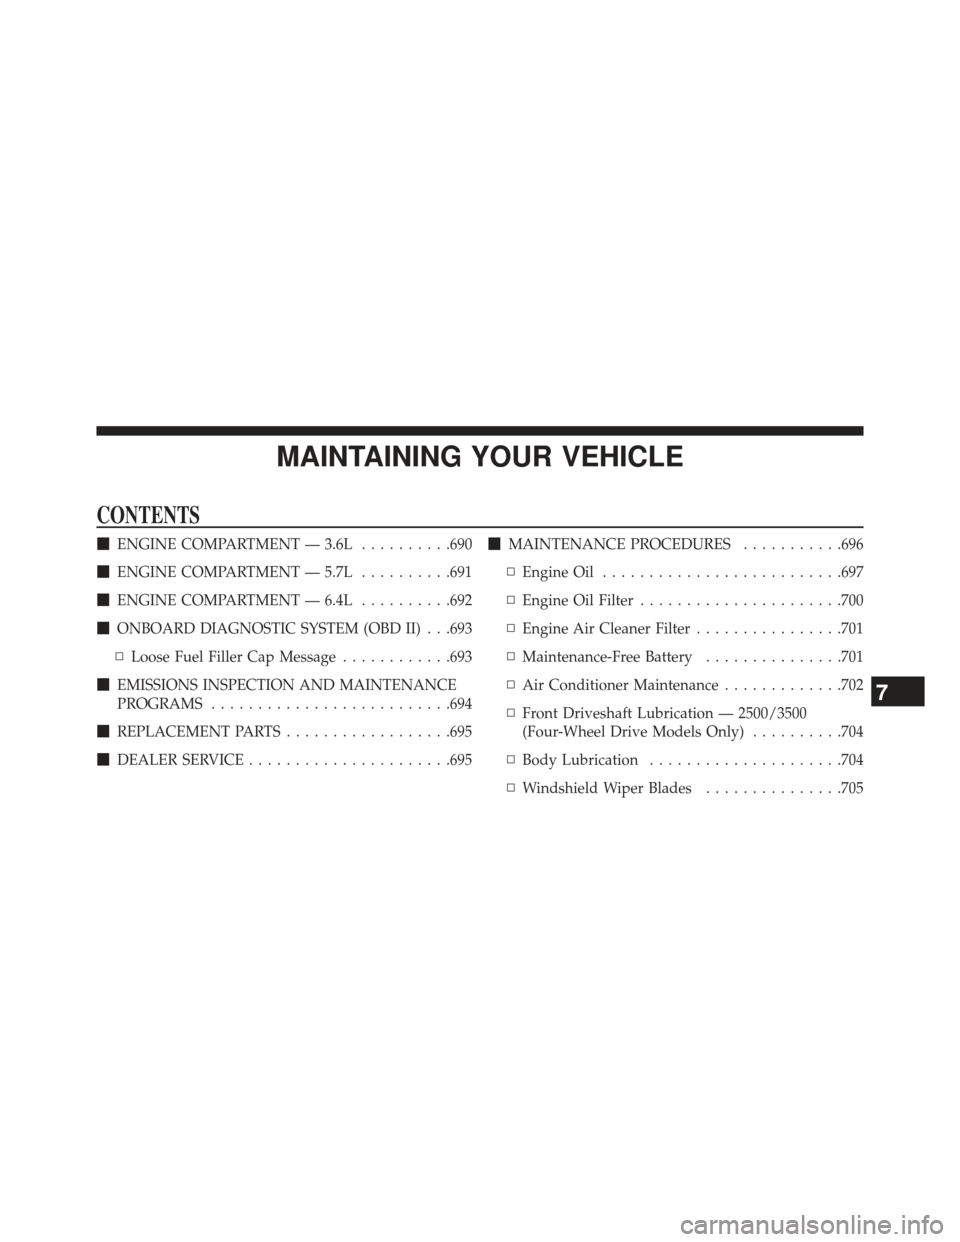 Ram 1500 2014  Owners Manual MAINTAINING YOUR VEHICLE
CONTENTS
ENGINE COMPARTMENT — 3.6L ..........690
 ENGINE COMPARTMENT — 5.7L ..........691
 ENGINE COMPARTMENT — 6.4L ..........692
 ONBOARD DIAGNOSTIC SYSTEM (OBD II